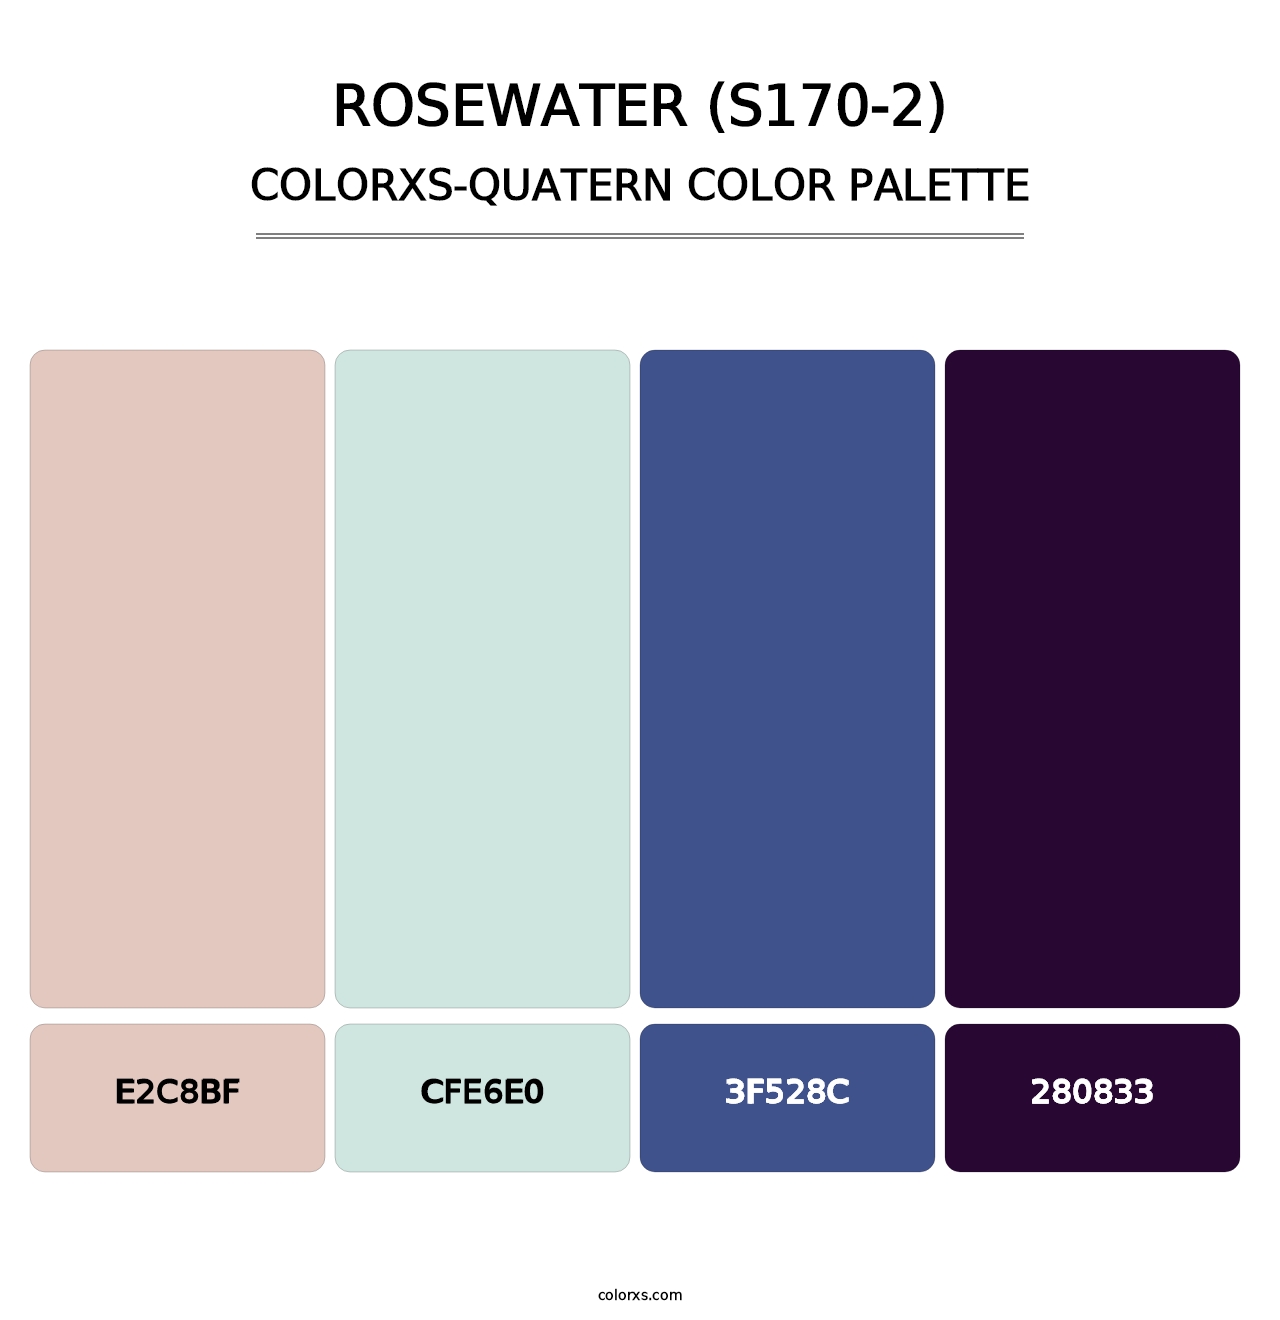 Rosewater (S170-2) - Colorxs Quatern Palette